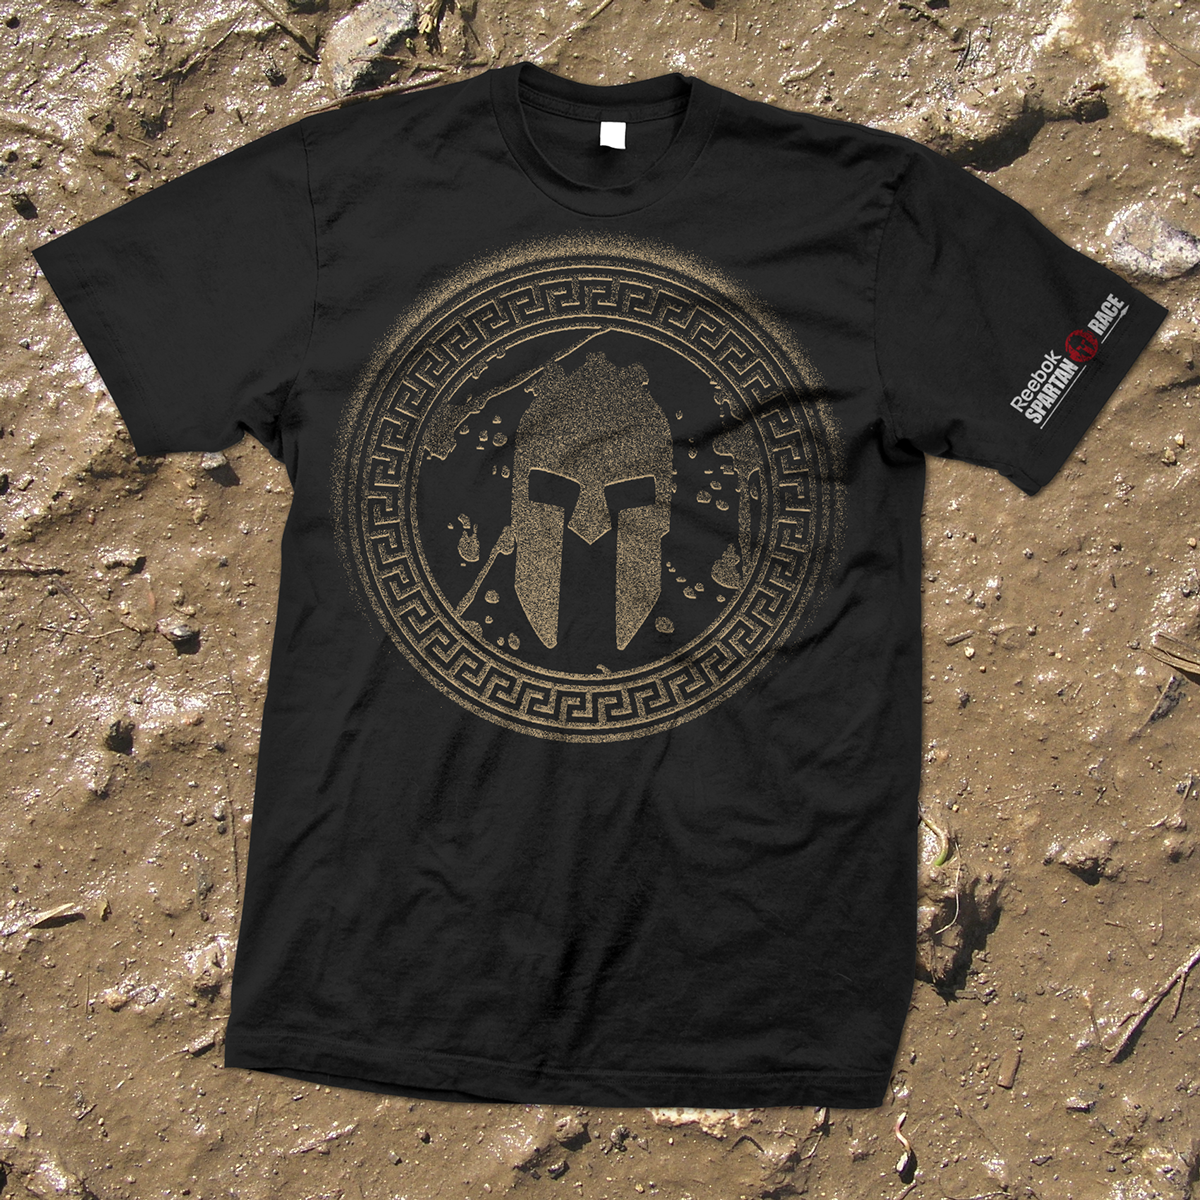 Because Are depressed Customer Reebok Spartan Race Graphic Tees FW13 on Behance